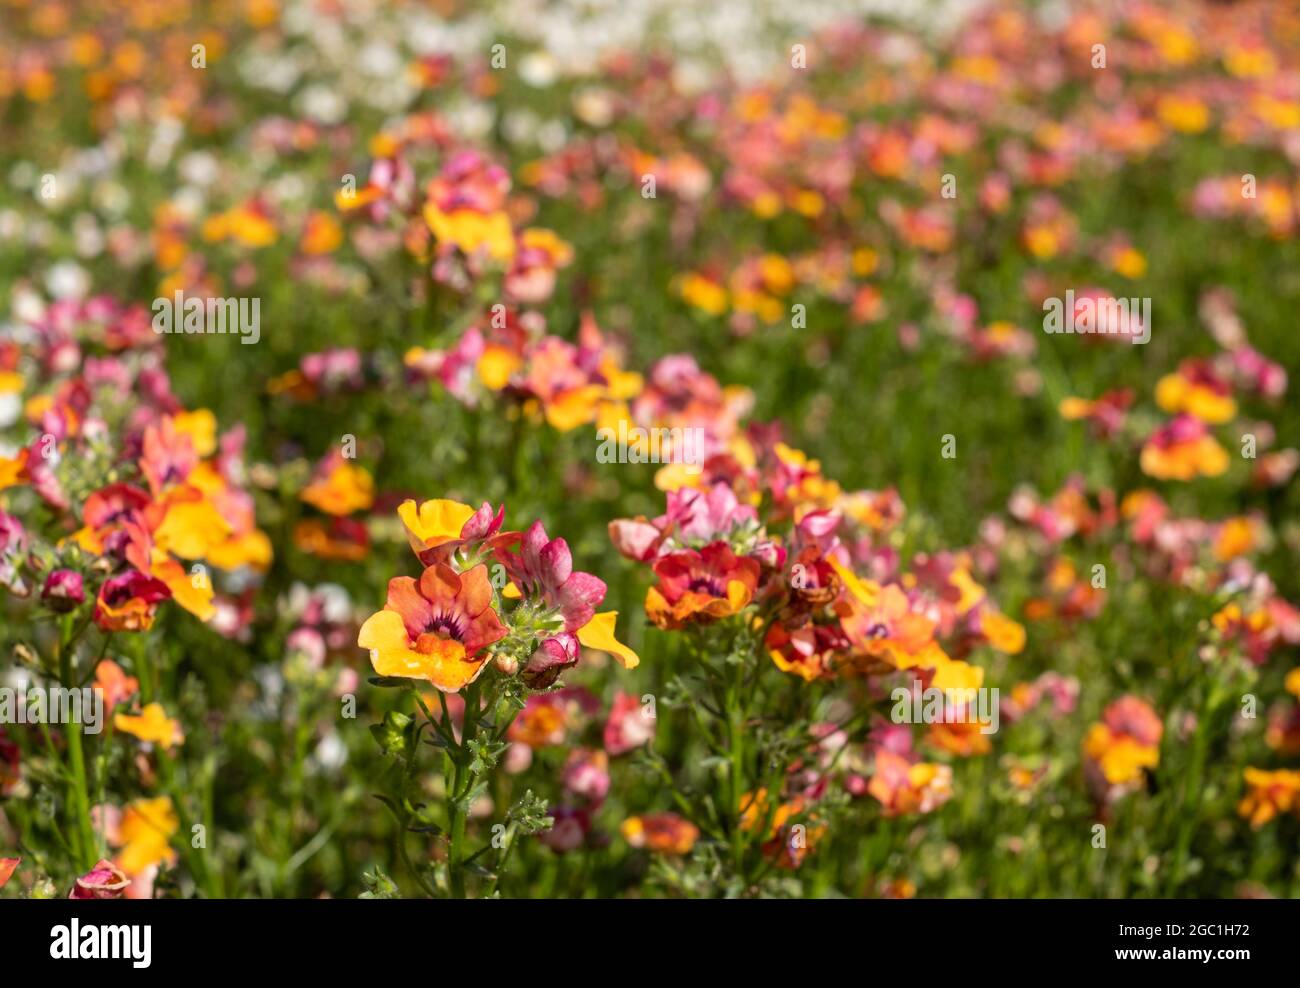 Colourful pink and yelllow nemesia flowers, low growing annual plants with colourful petals. Stock Photo